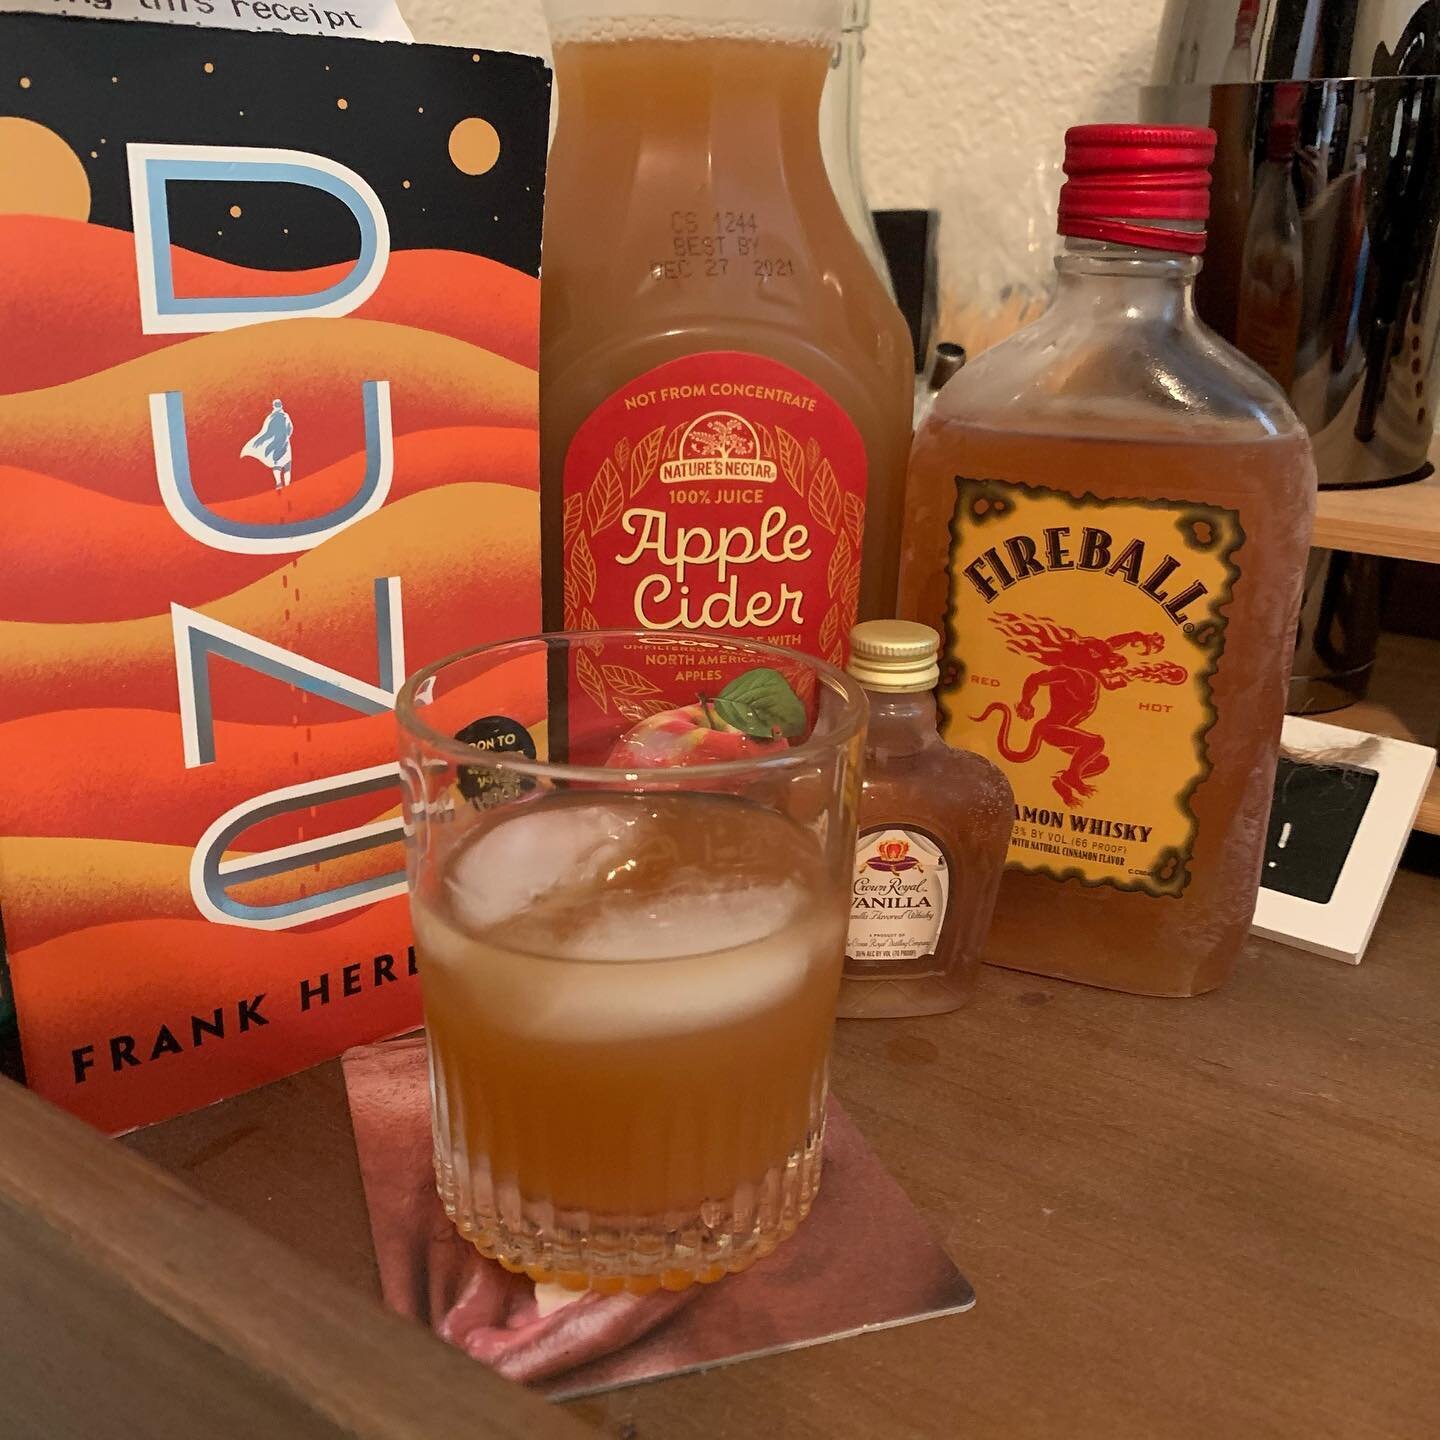 The Spice must flow with Dune and a Spiced Cider

&bull;1oz of Fireball
&bull;.5oz of vanilla whiskey
&bull;Top with apple cider